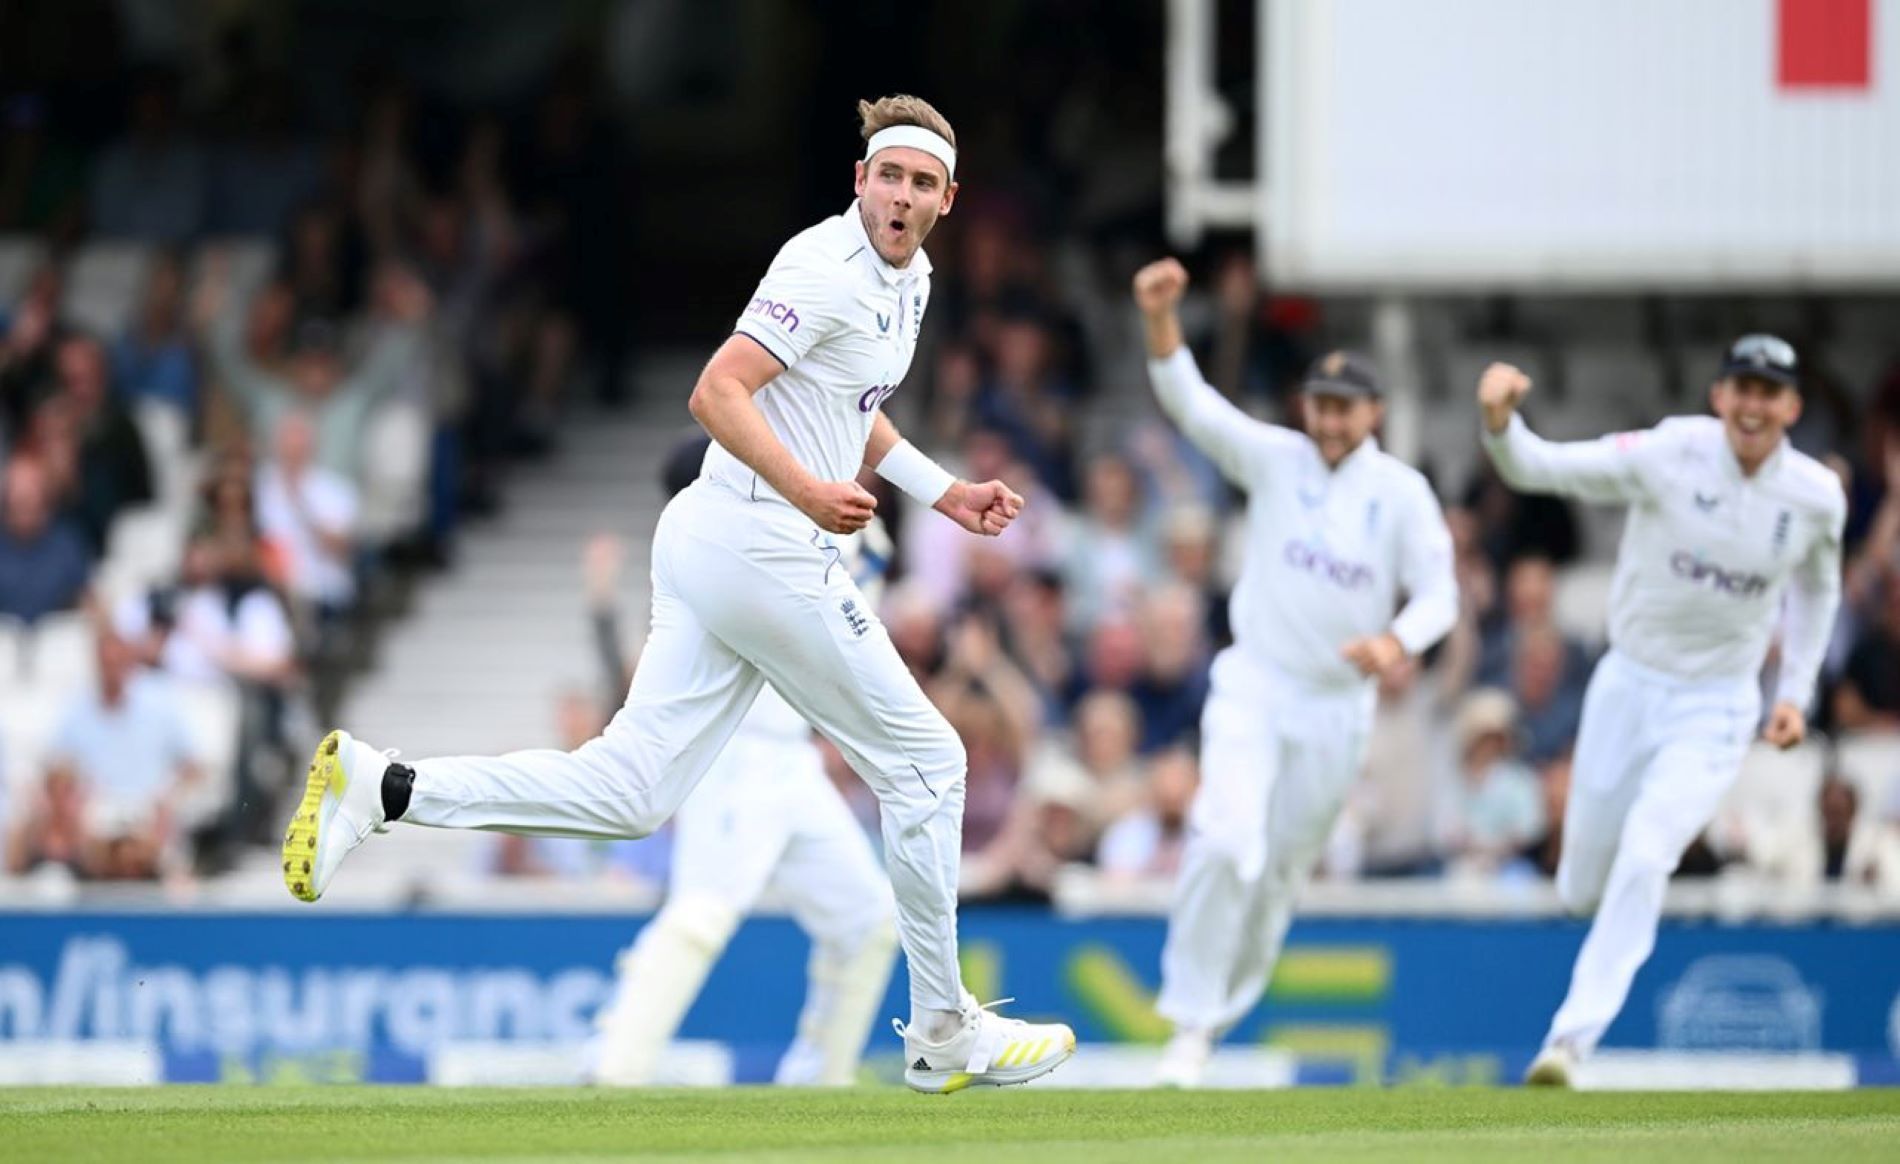 Broad continued his sensational Ashes series at the Oval